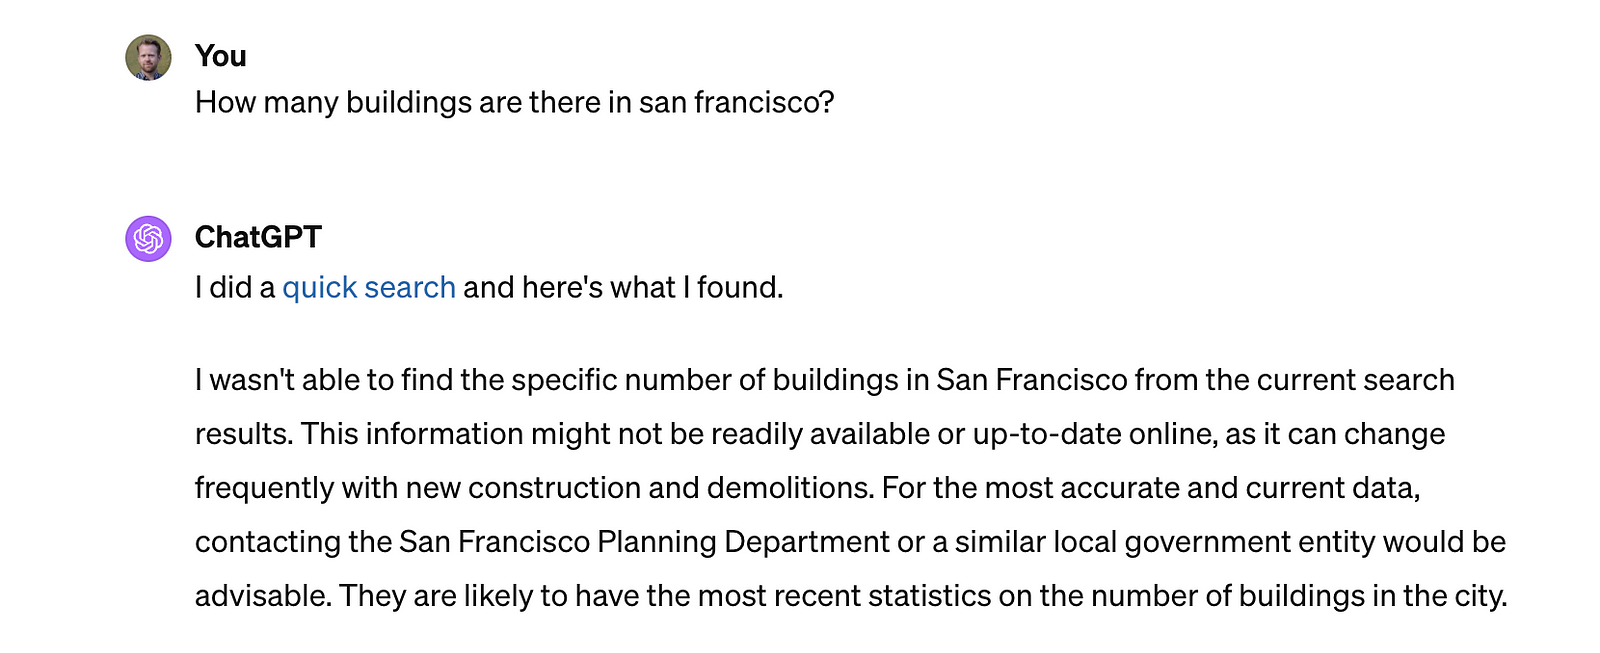 Screenshot of ChatGPT responding to the question: How many buildings are there in San Francisco